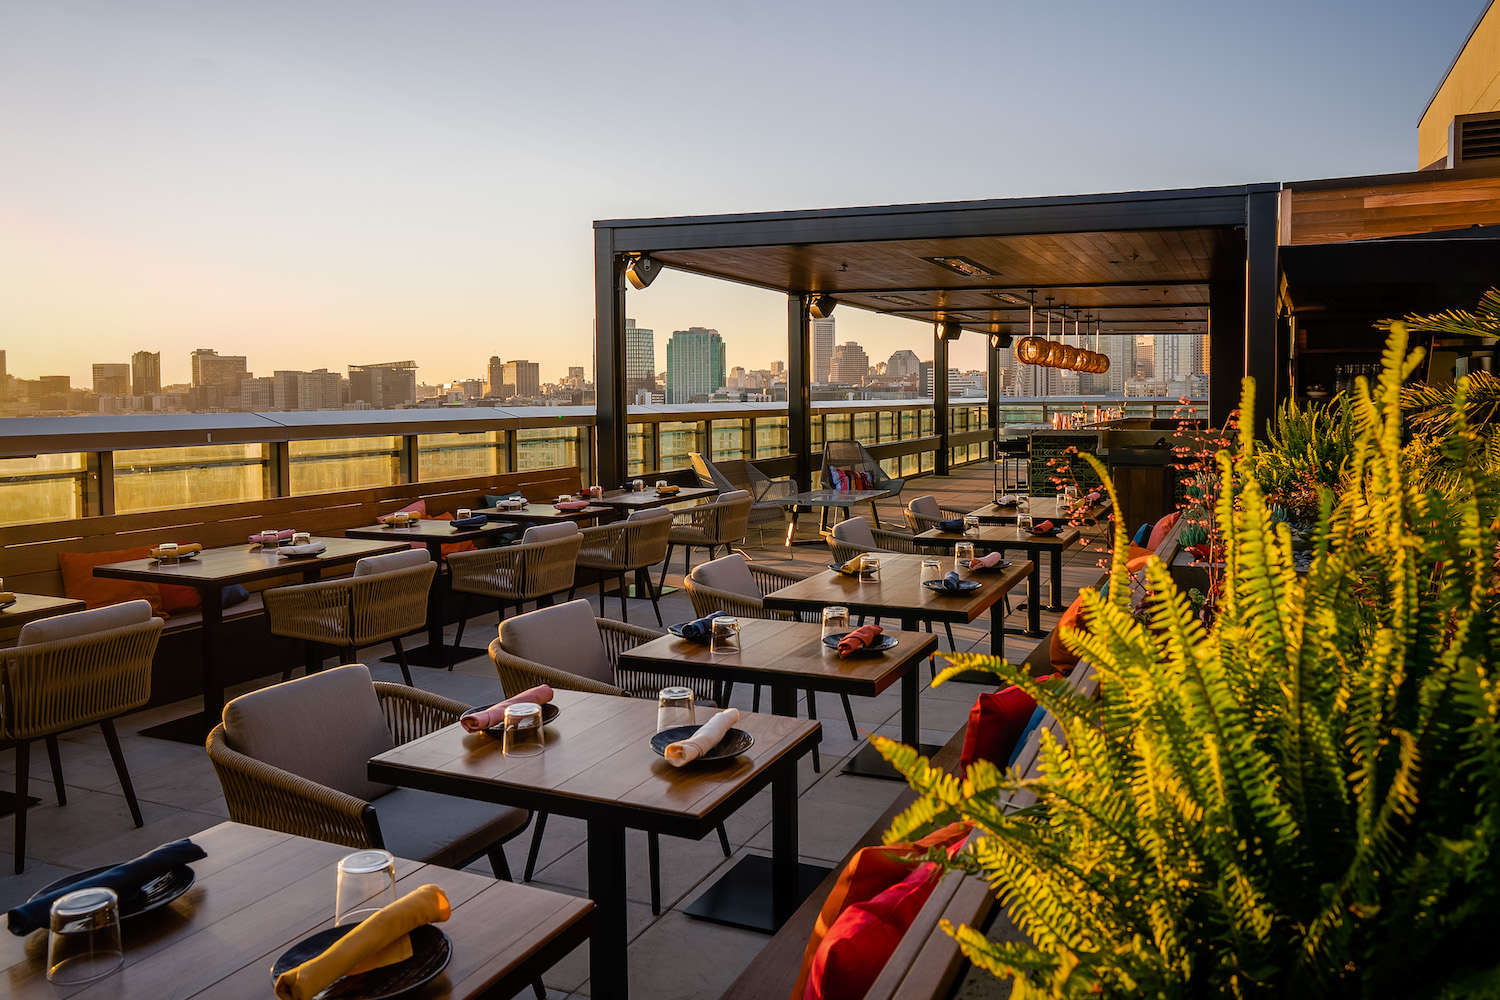 Rooftop bar area with a long row of tables, chairs and booth seats overlooking the city